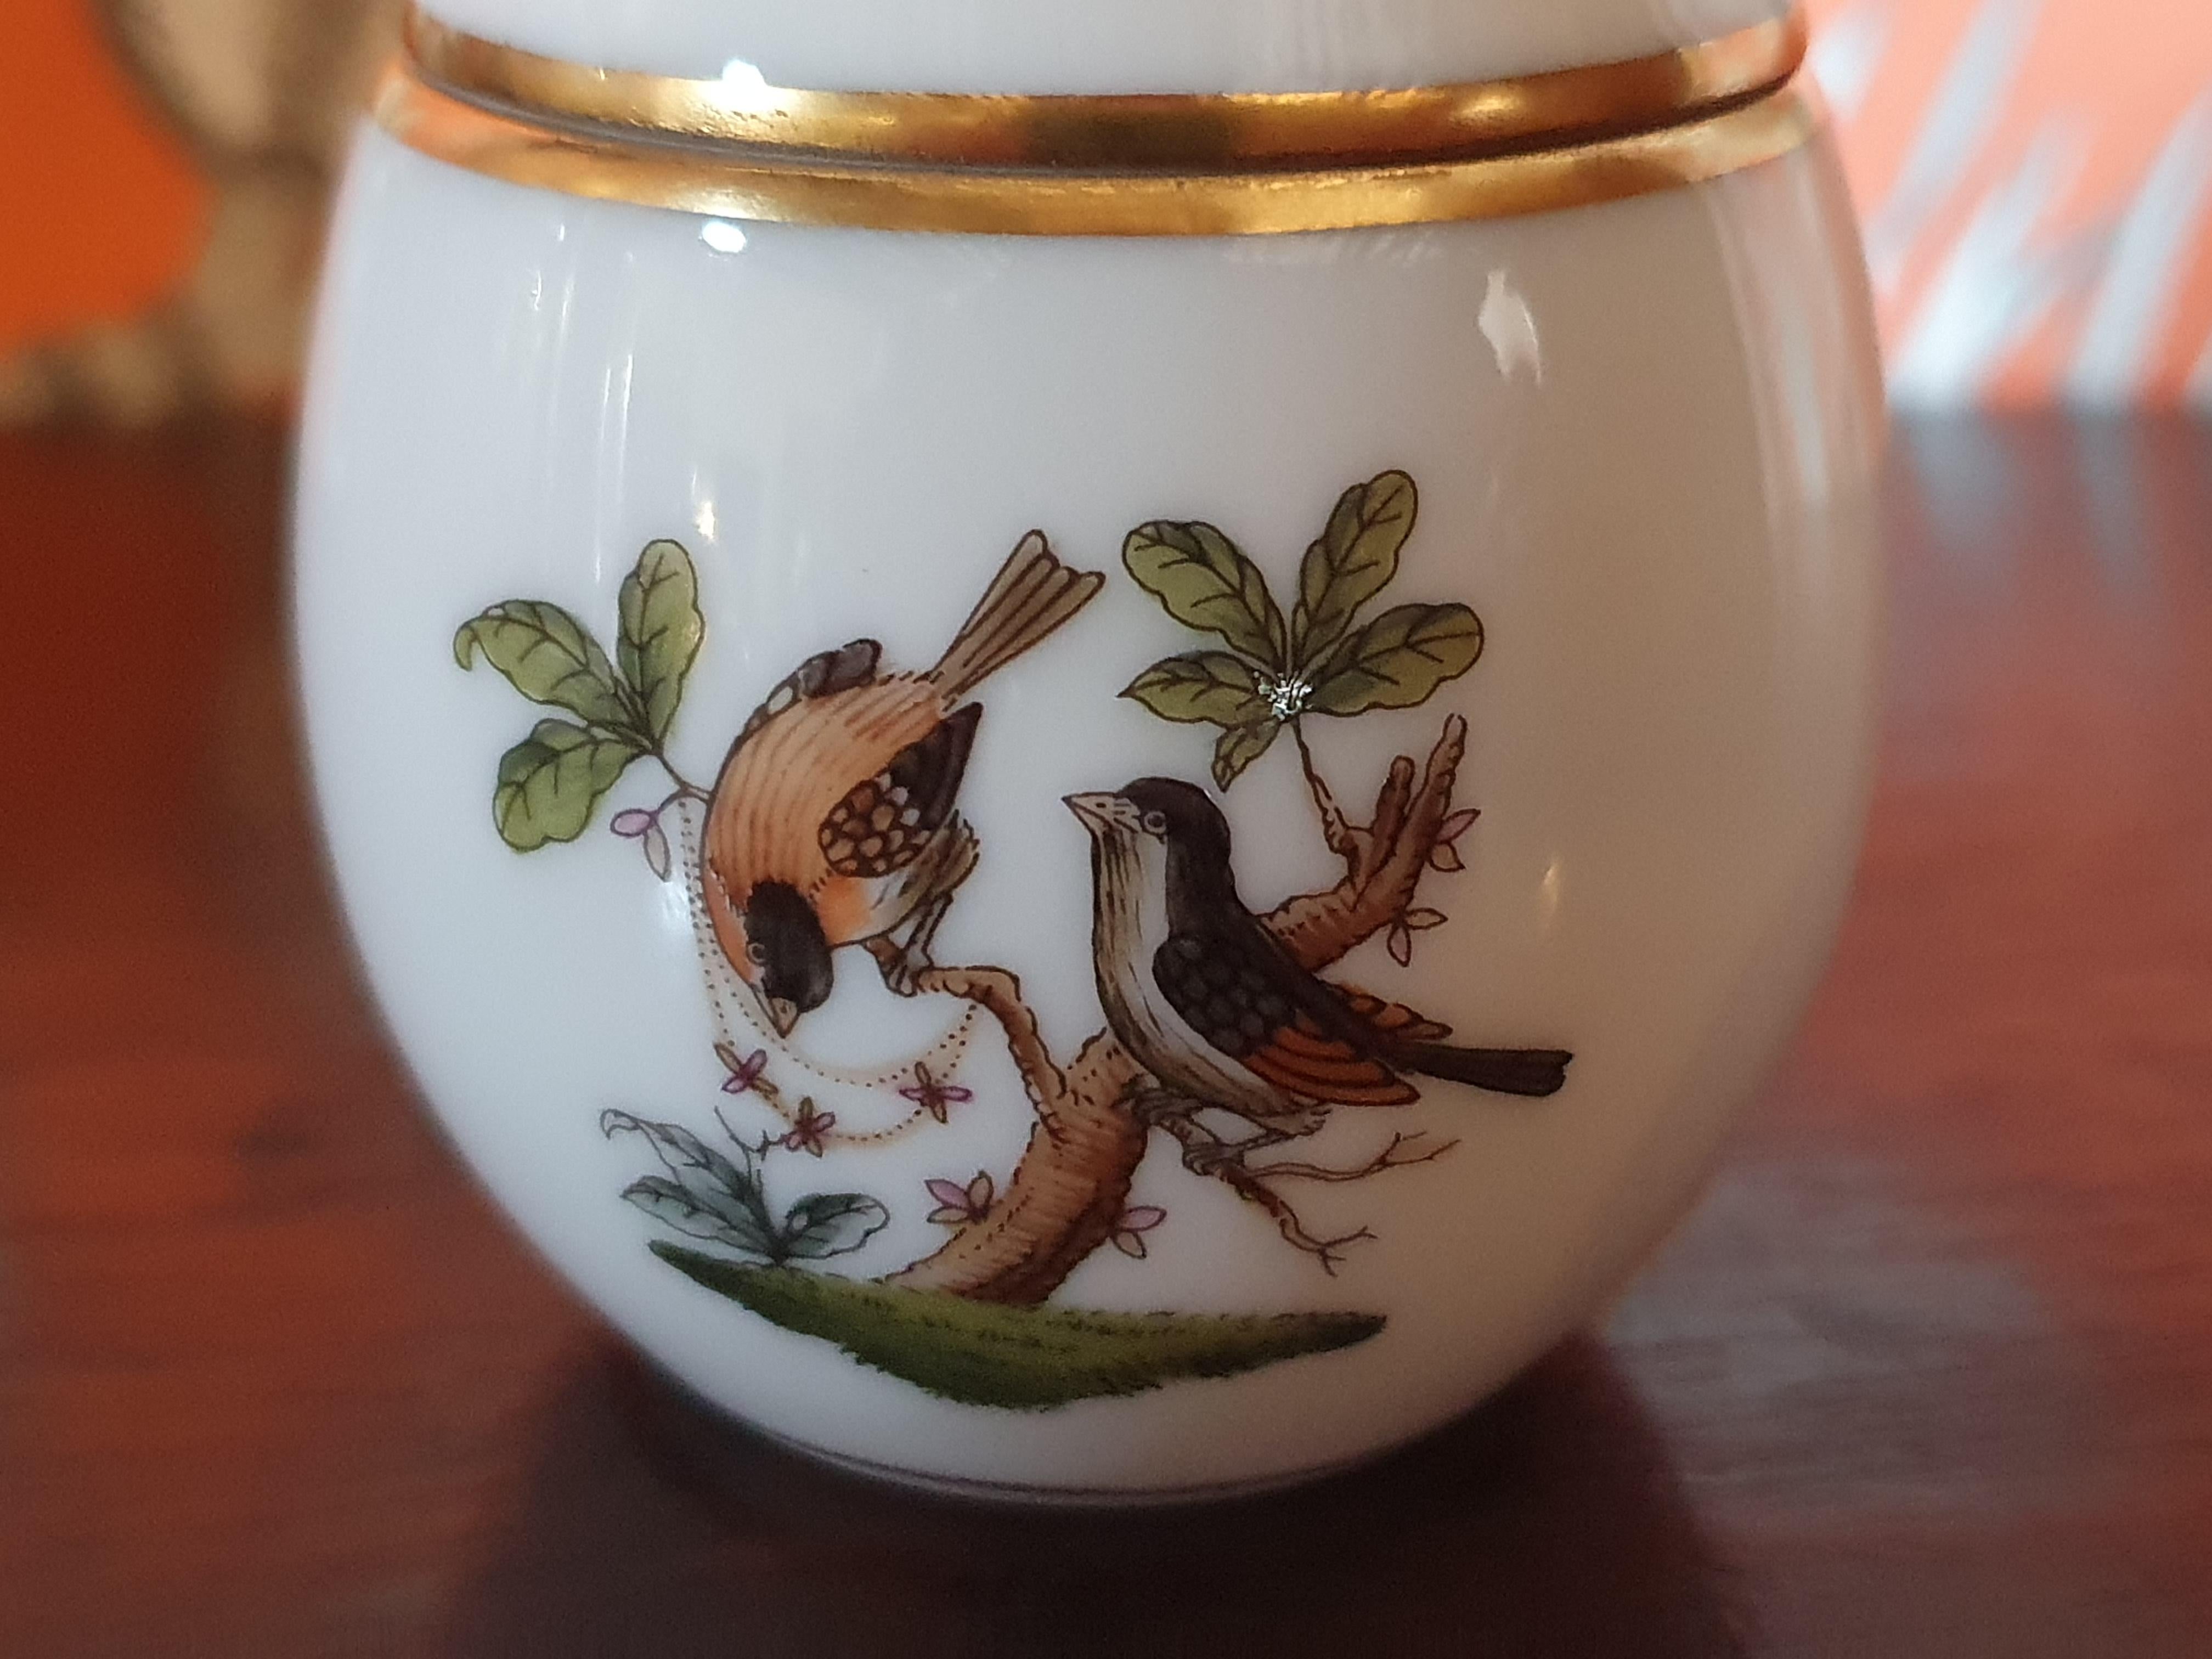 Beautiful small egg box of the famous Herend hand painted porcelain. 

Hand painted with the Rothschild decoration so called because it was favored by the famous banker family.

Since 1826, Herend's factory has been one of the most famous